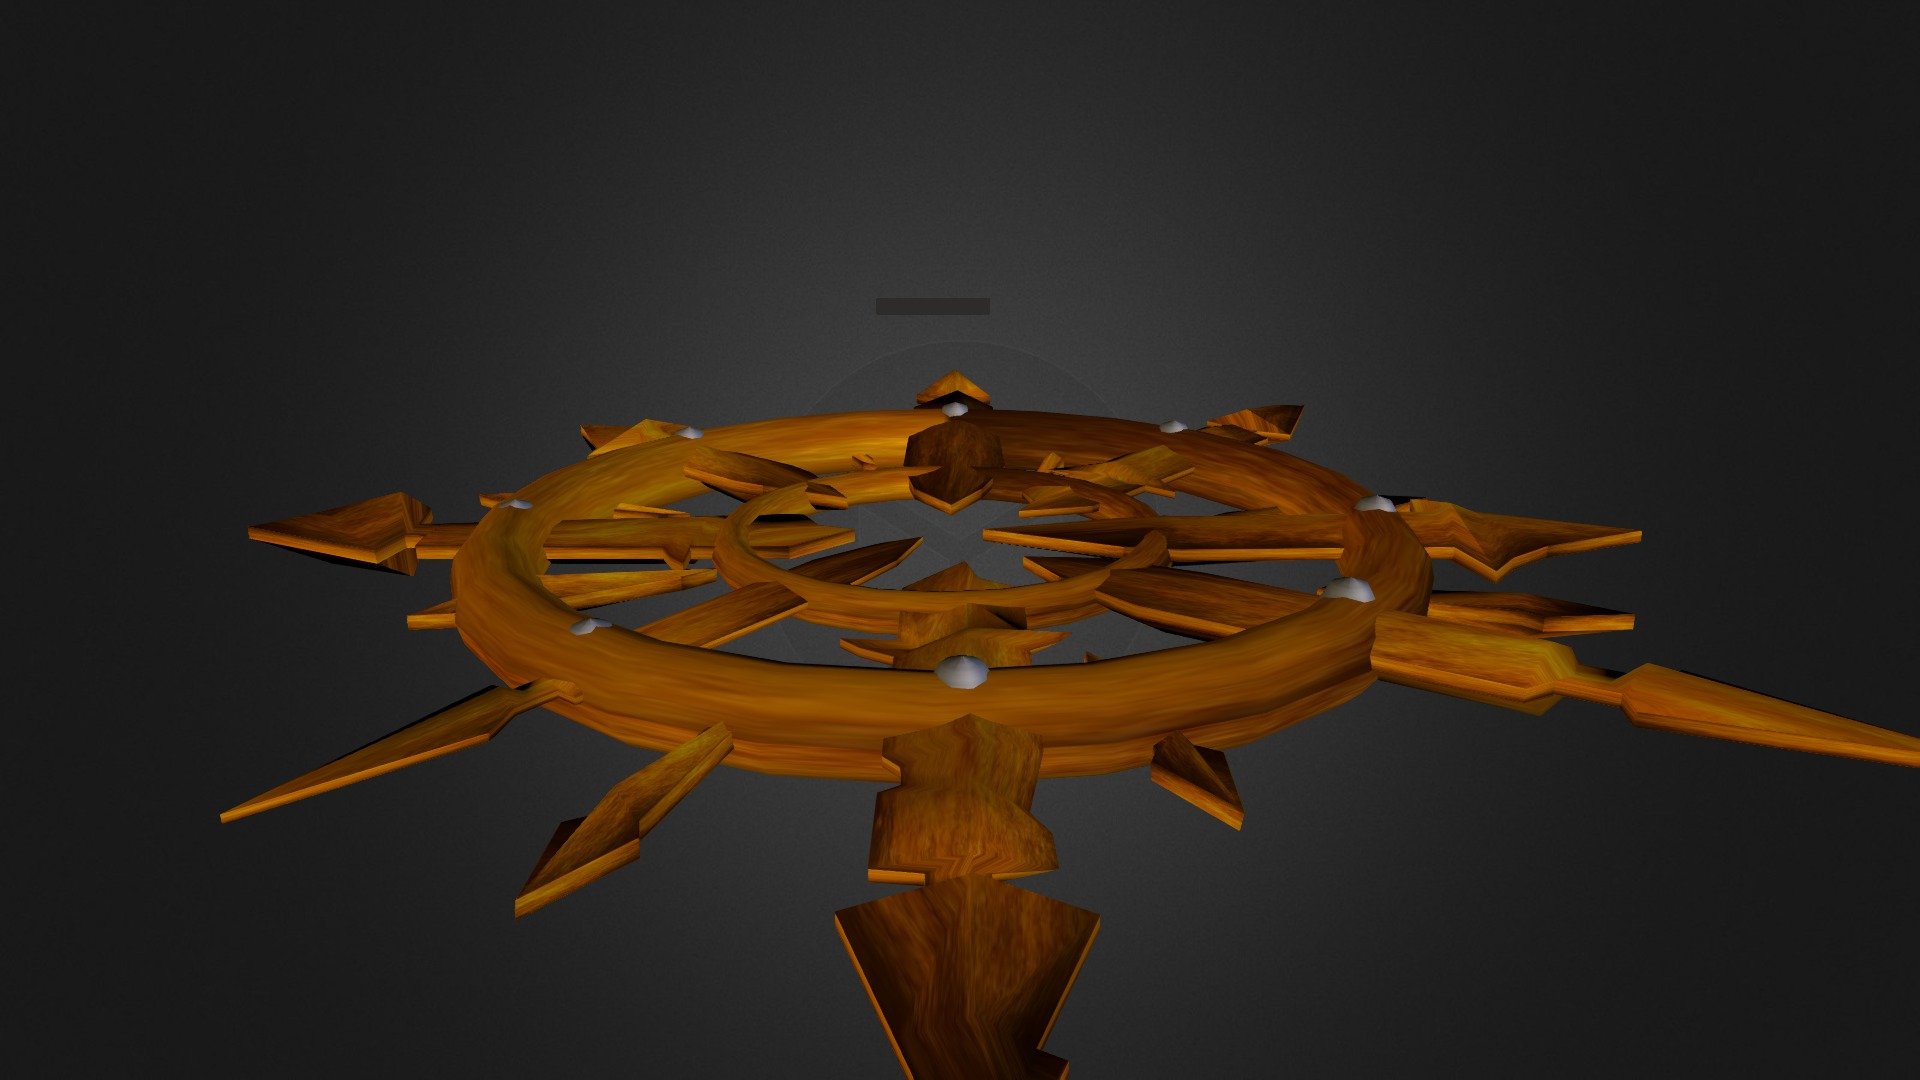 A Chaos Star that was created for use within the Arcana Ritual Toolset. Based on the Warhamemr 40k Chaos Star 3d model